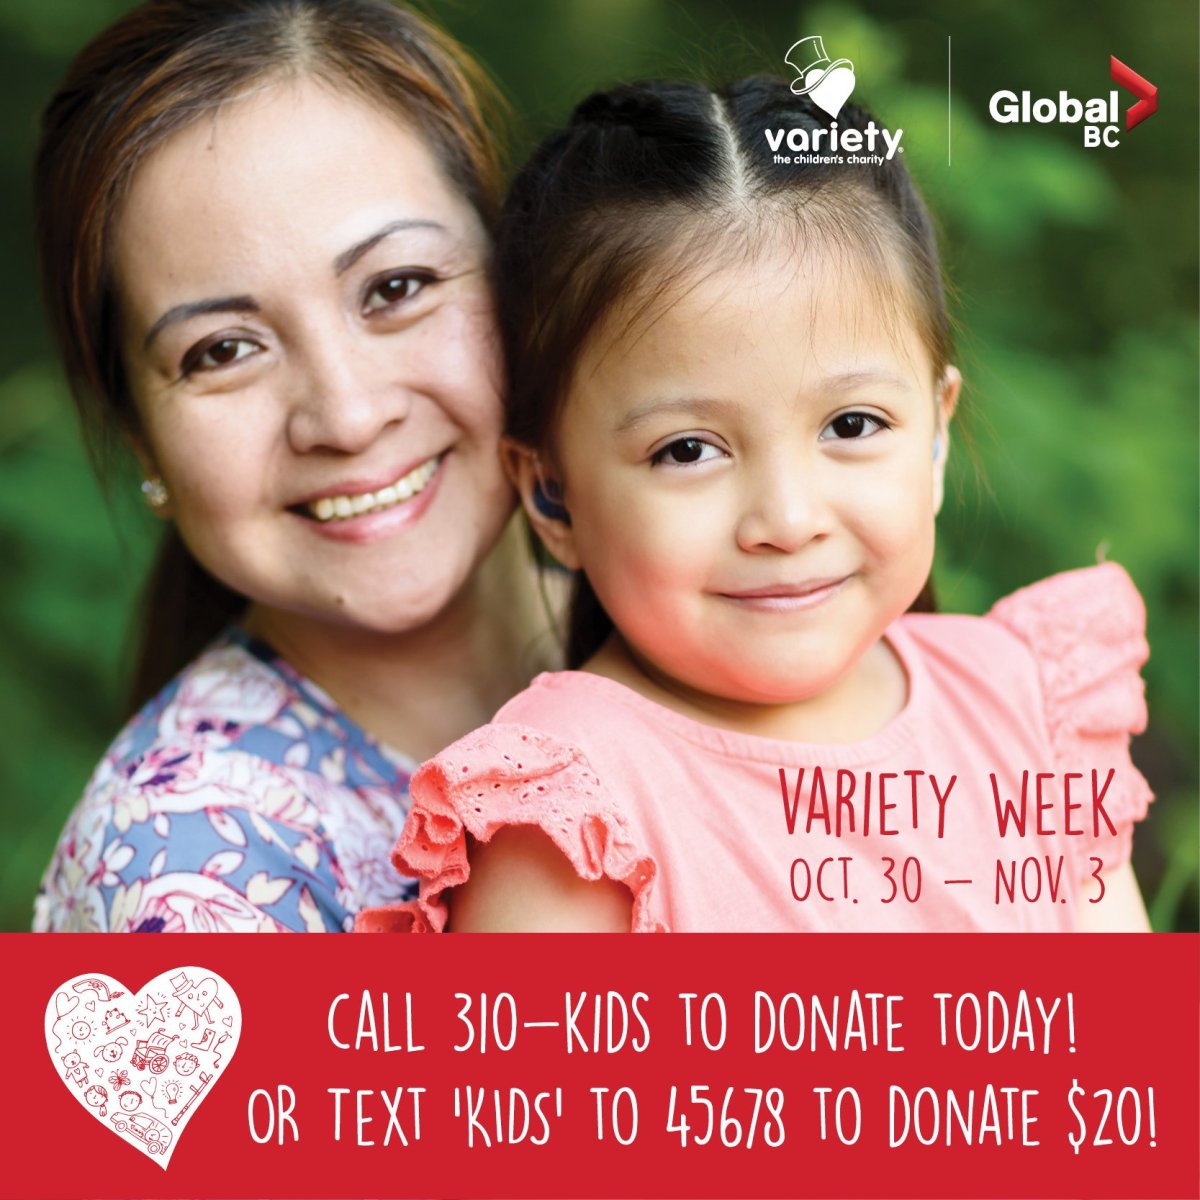 You too can help kids around B.C. by donating to Variety the Children's Charity.